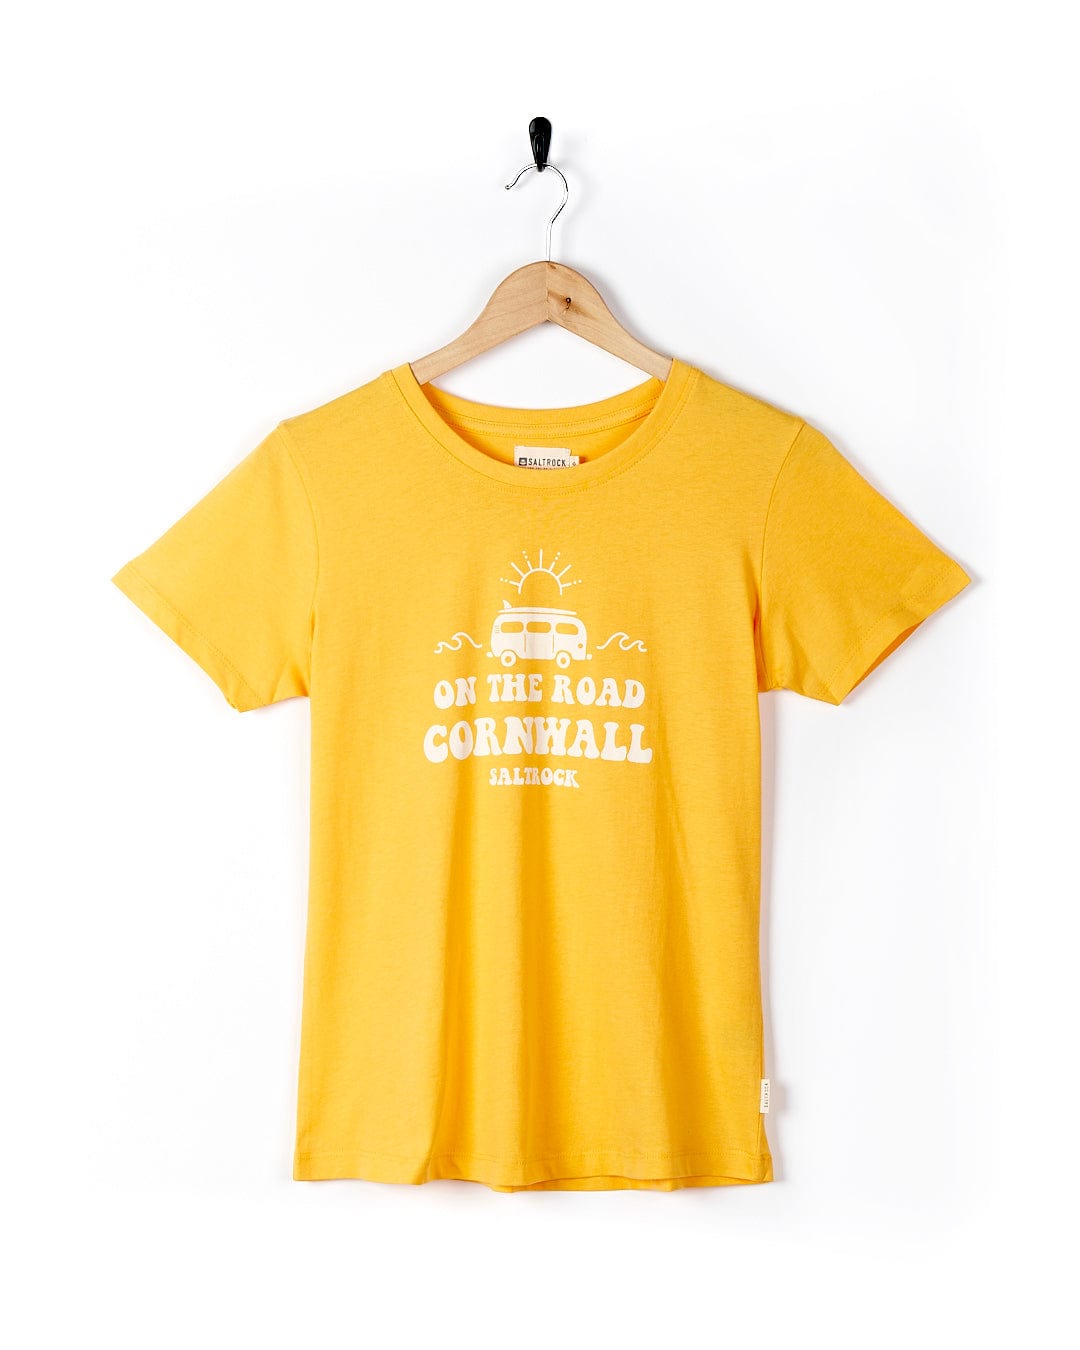 A yellow Saltrock On The Road Cornwall - Womens Short Sleeve T-Shirt with the words 'only hard work' on it.